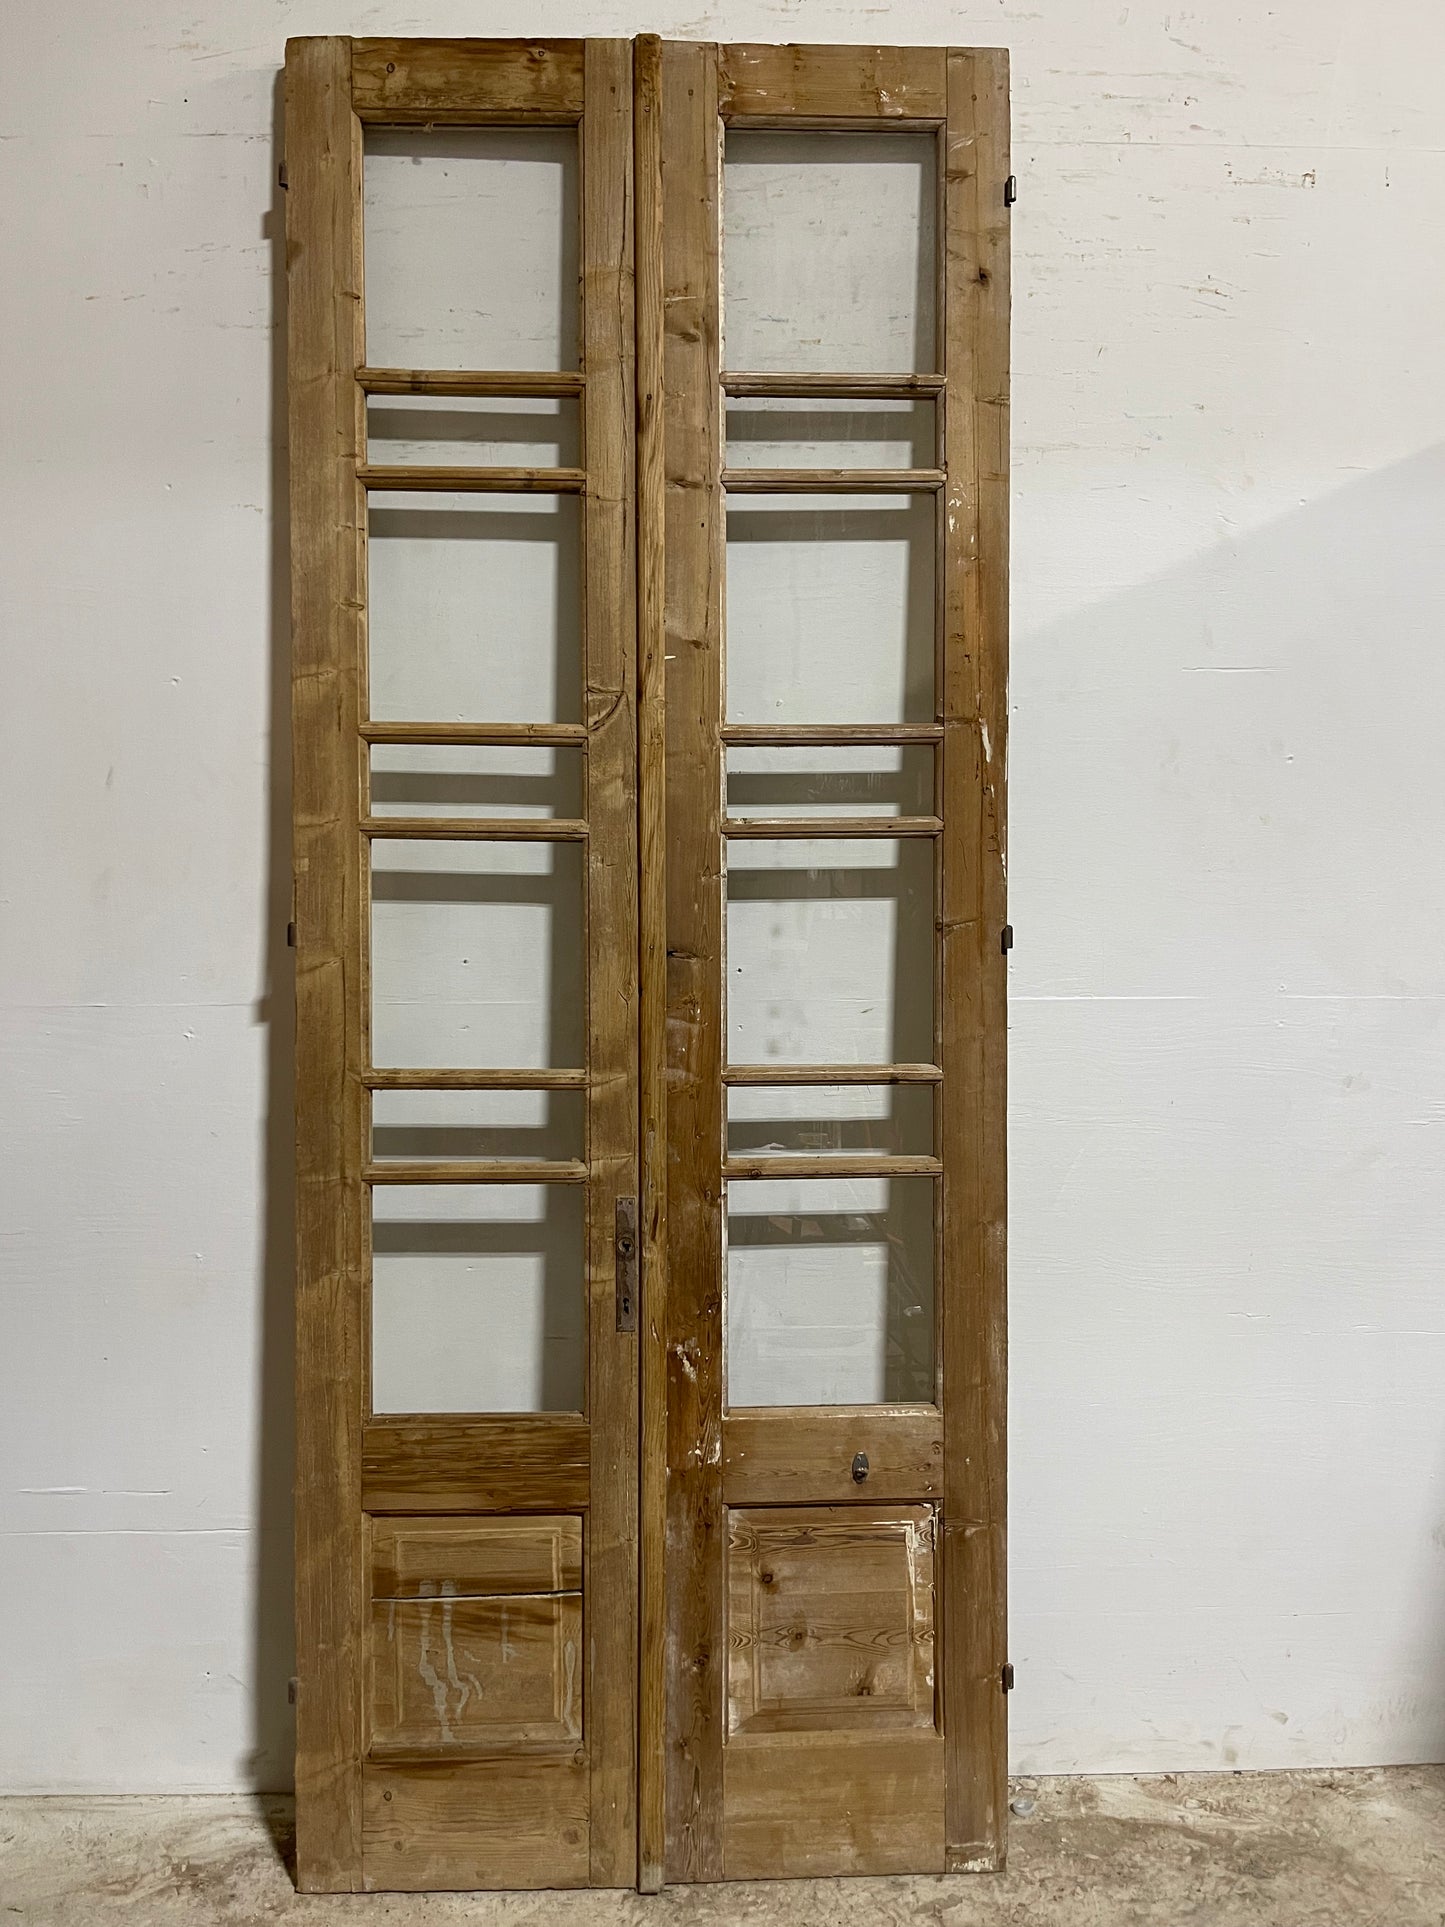 Antique French Panel Doors with glass (100x39.25) J305